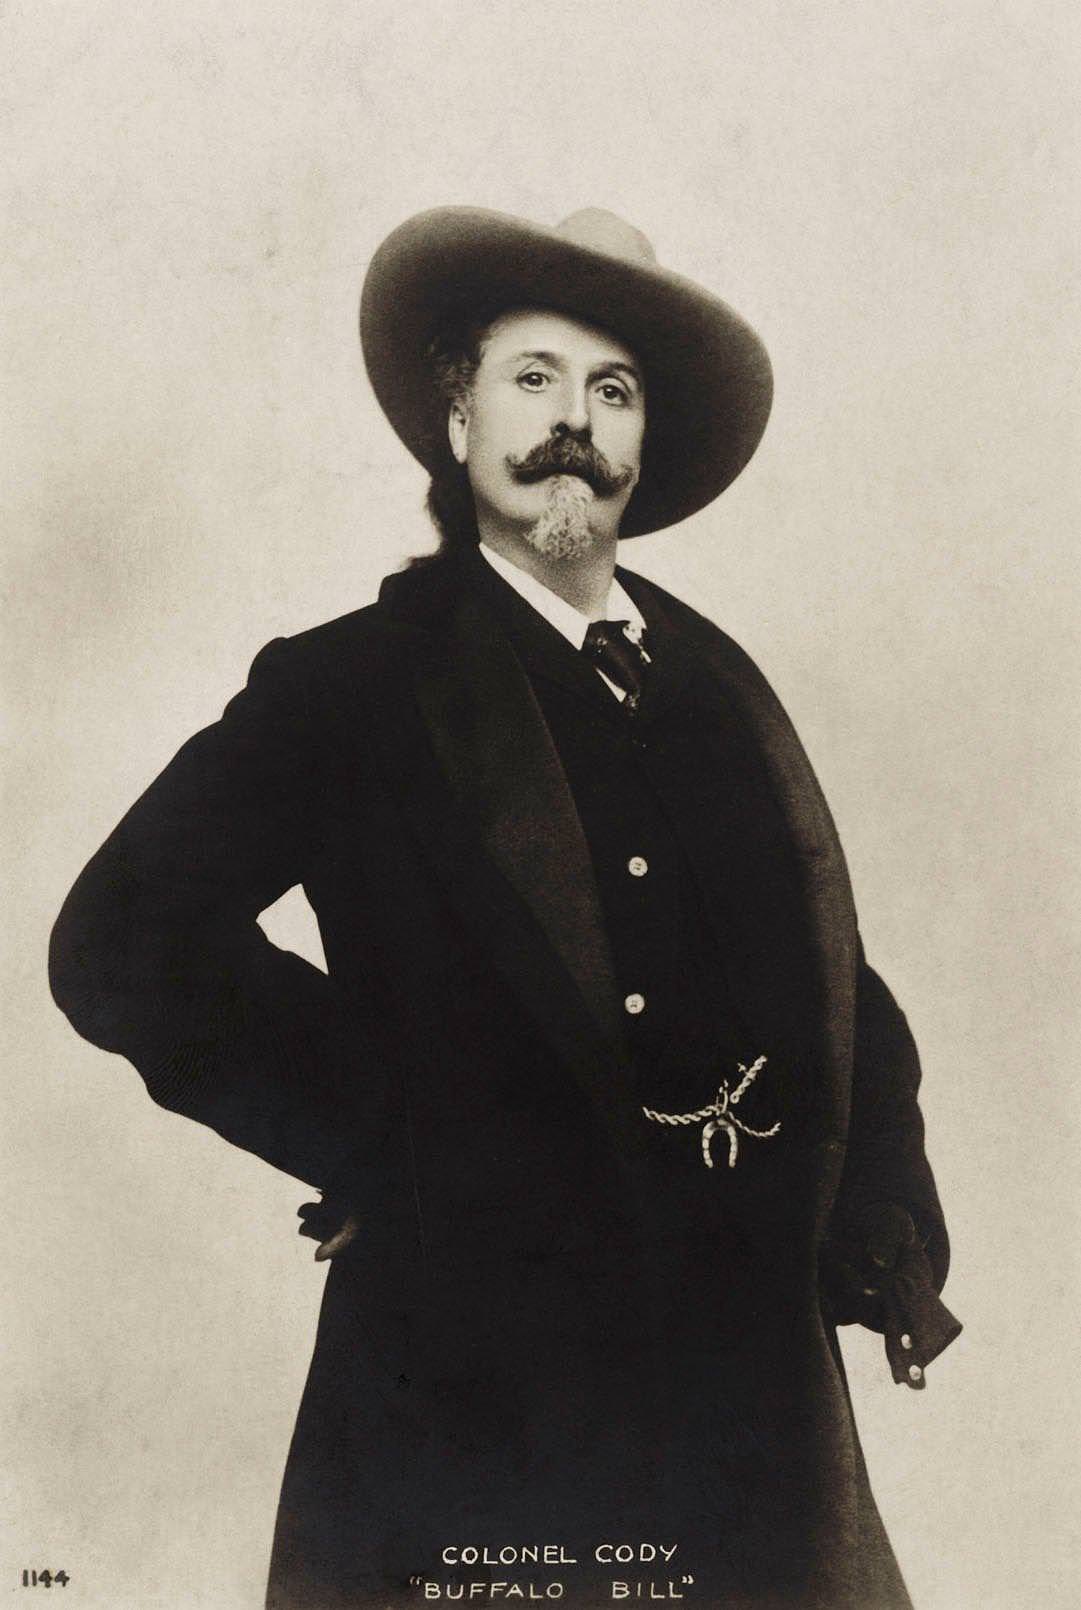 Buffalo Bill - Colonel W F Cody, famous for his cowboy shows about the Wild West of America. 26 February 1846